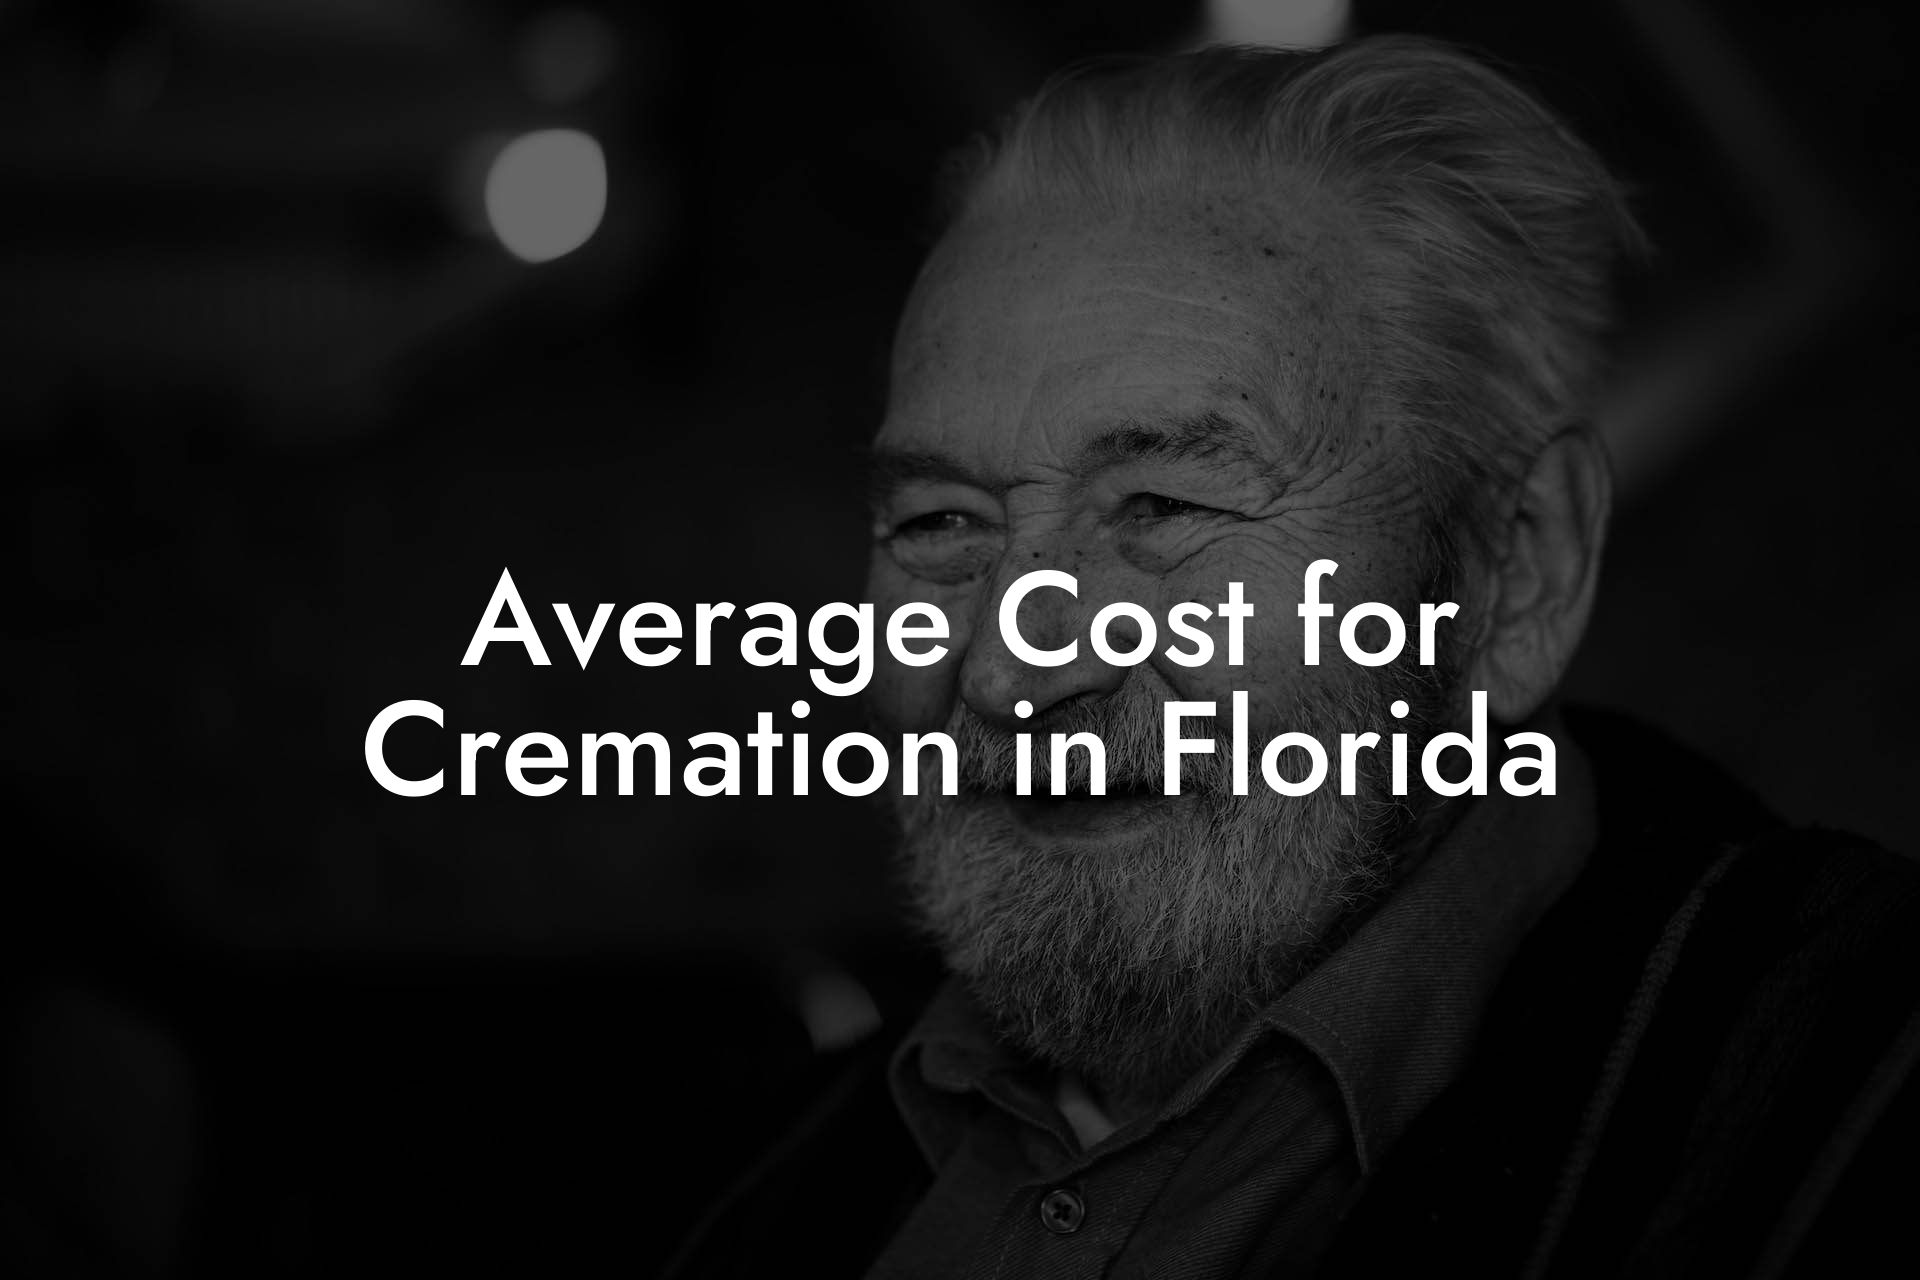 Average Cost for Cremation in Florida